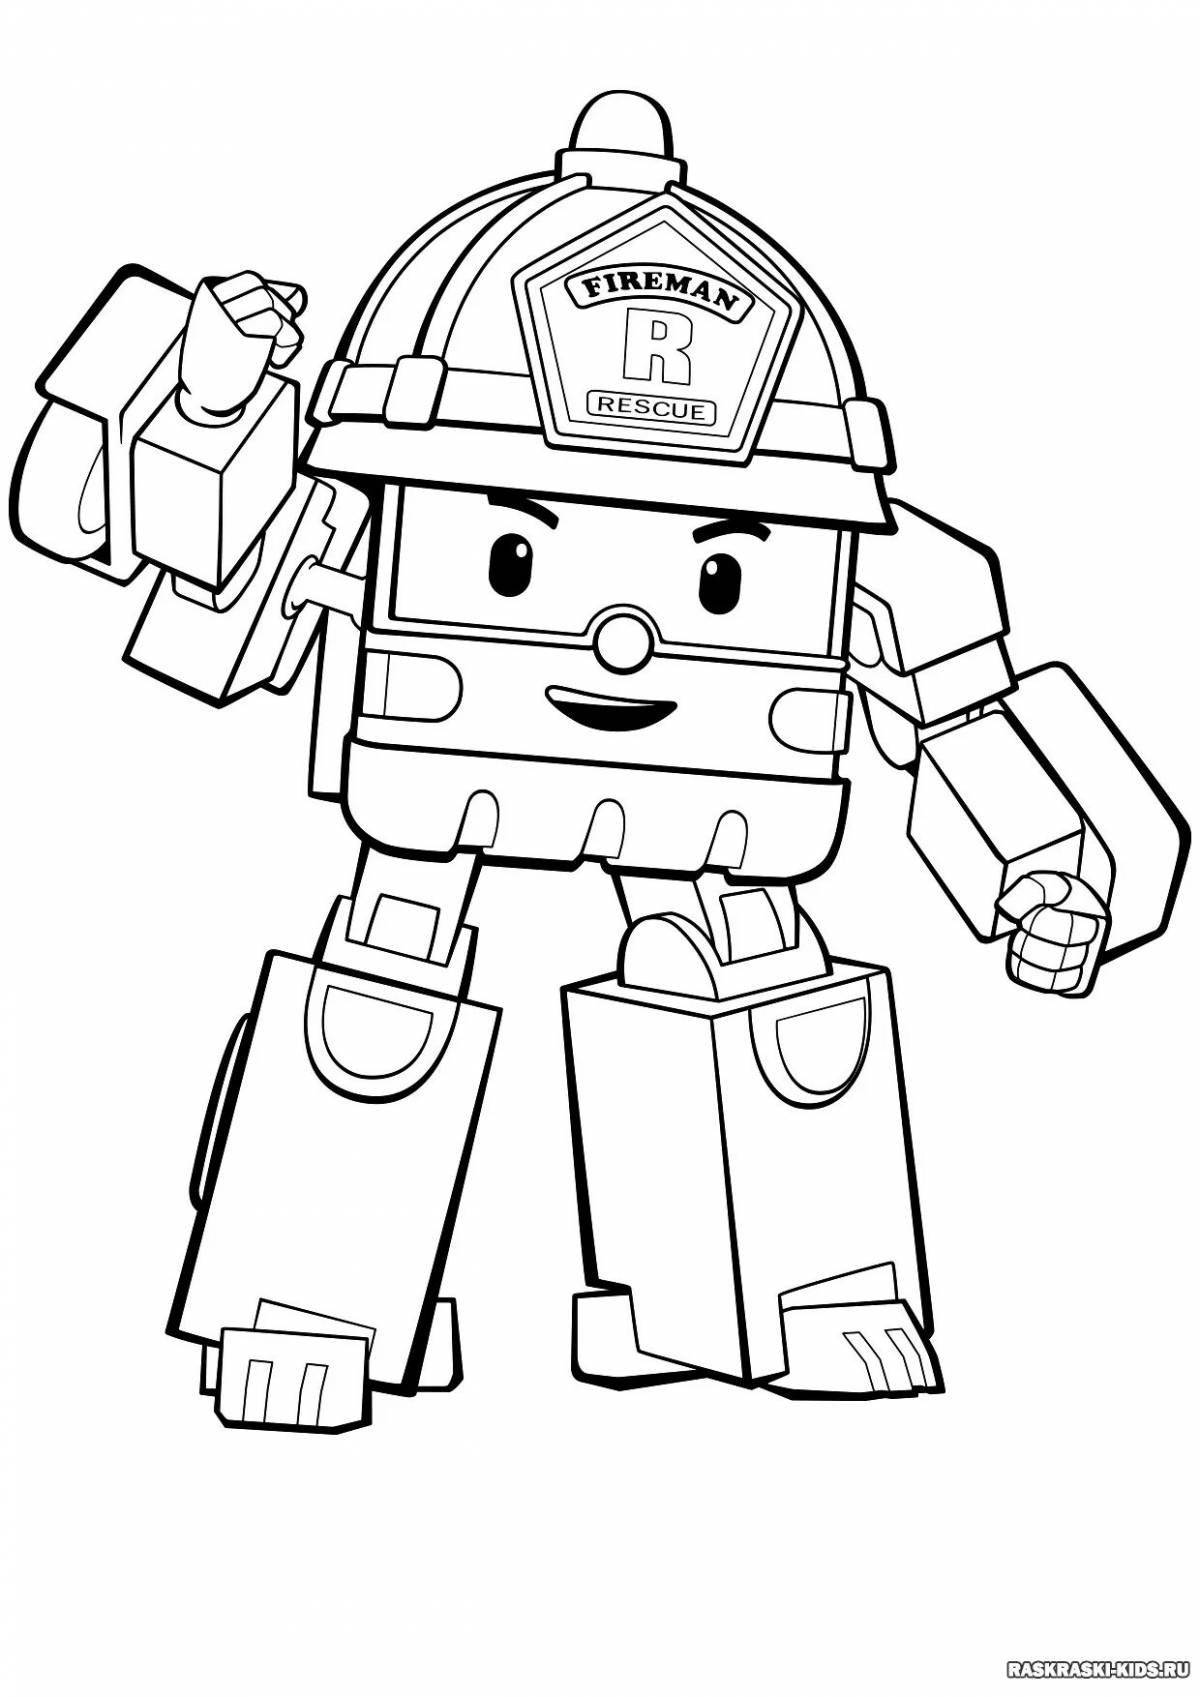 Robocar poly magic coloring book for kids 3-4 years old